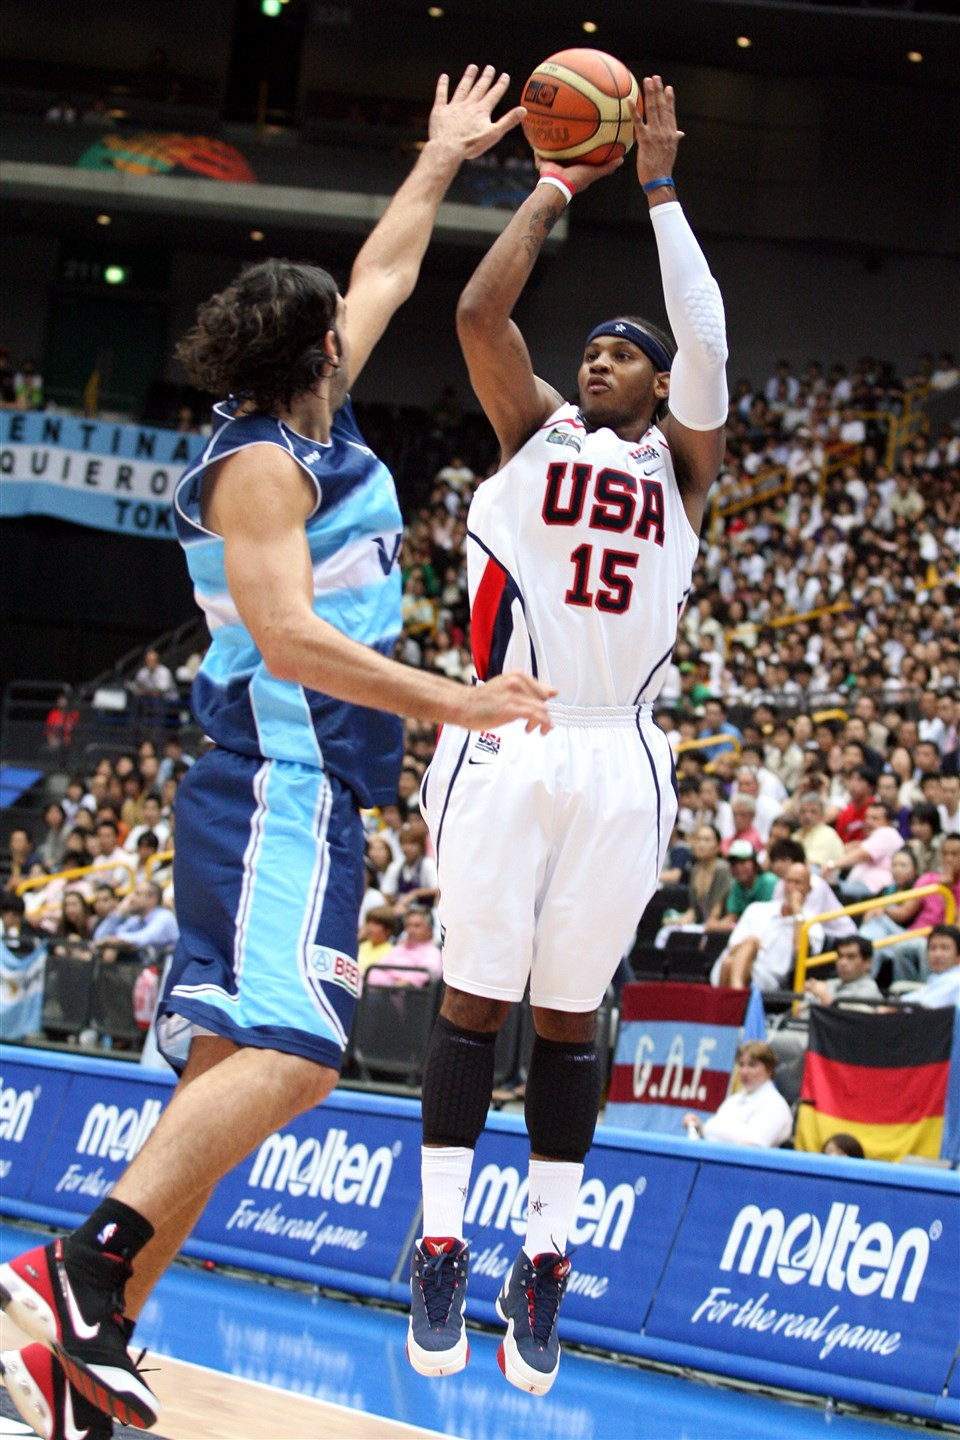 Carmelo Anthony at the 2006 FIBA World Cup, where he averaged almost 20 points ©FIBA